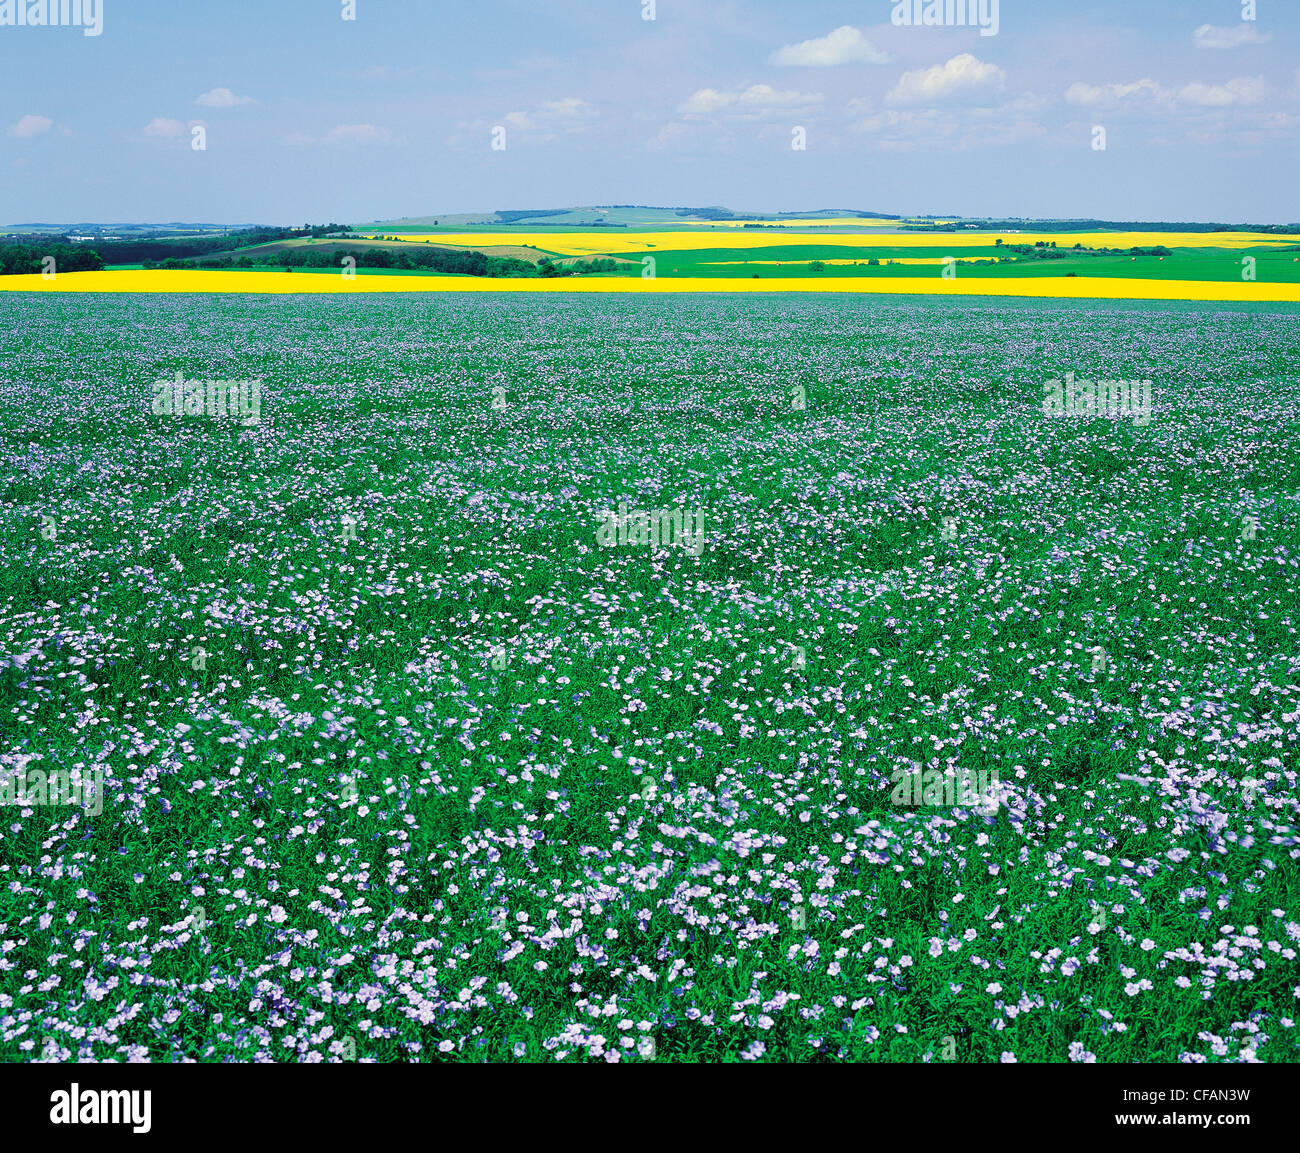 Flowering flax field with canola and grain field patterns in the background, Tiger Hills near Holland, Manitoba, Canada Stock Photo